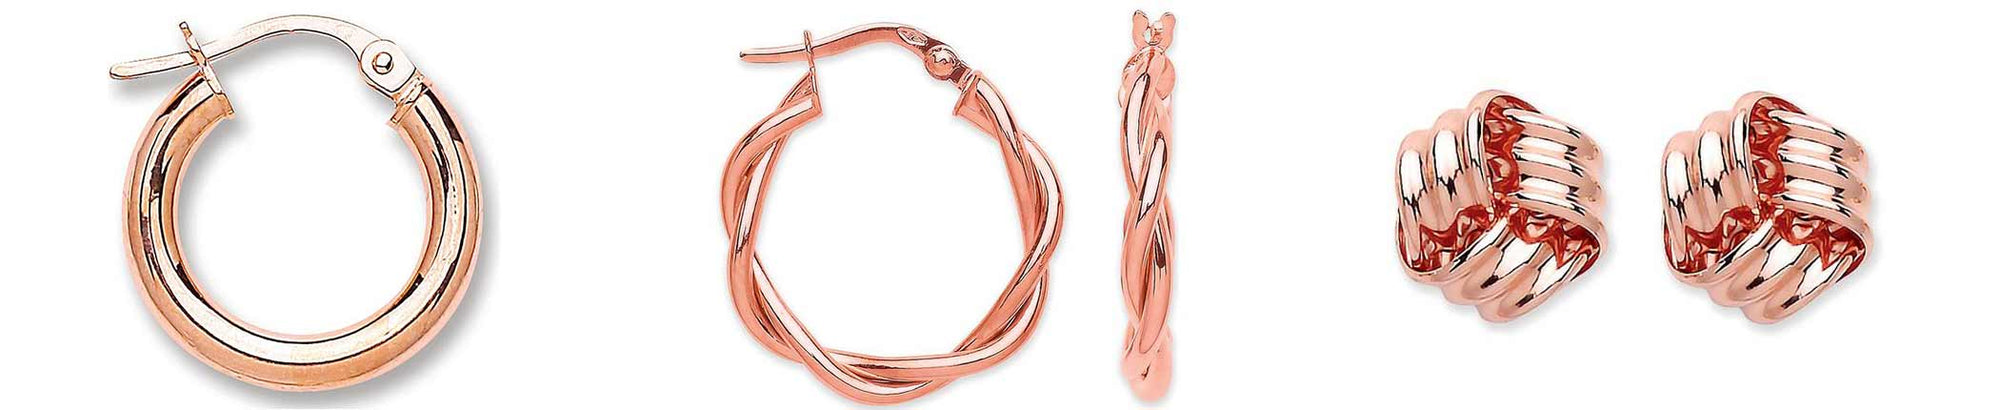 <font color=#000000>Quiz: which rose gold earrings suit your taste in jewellery</font>